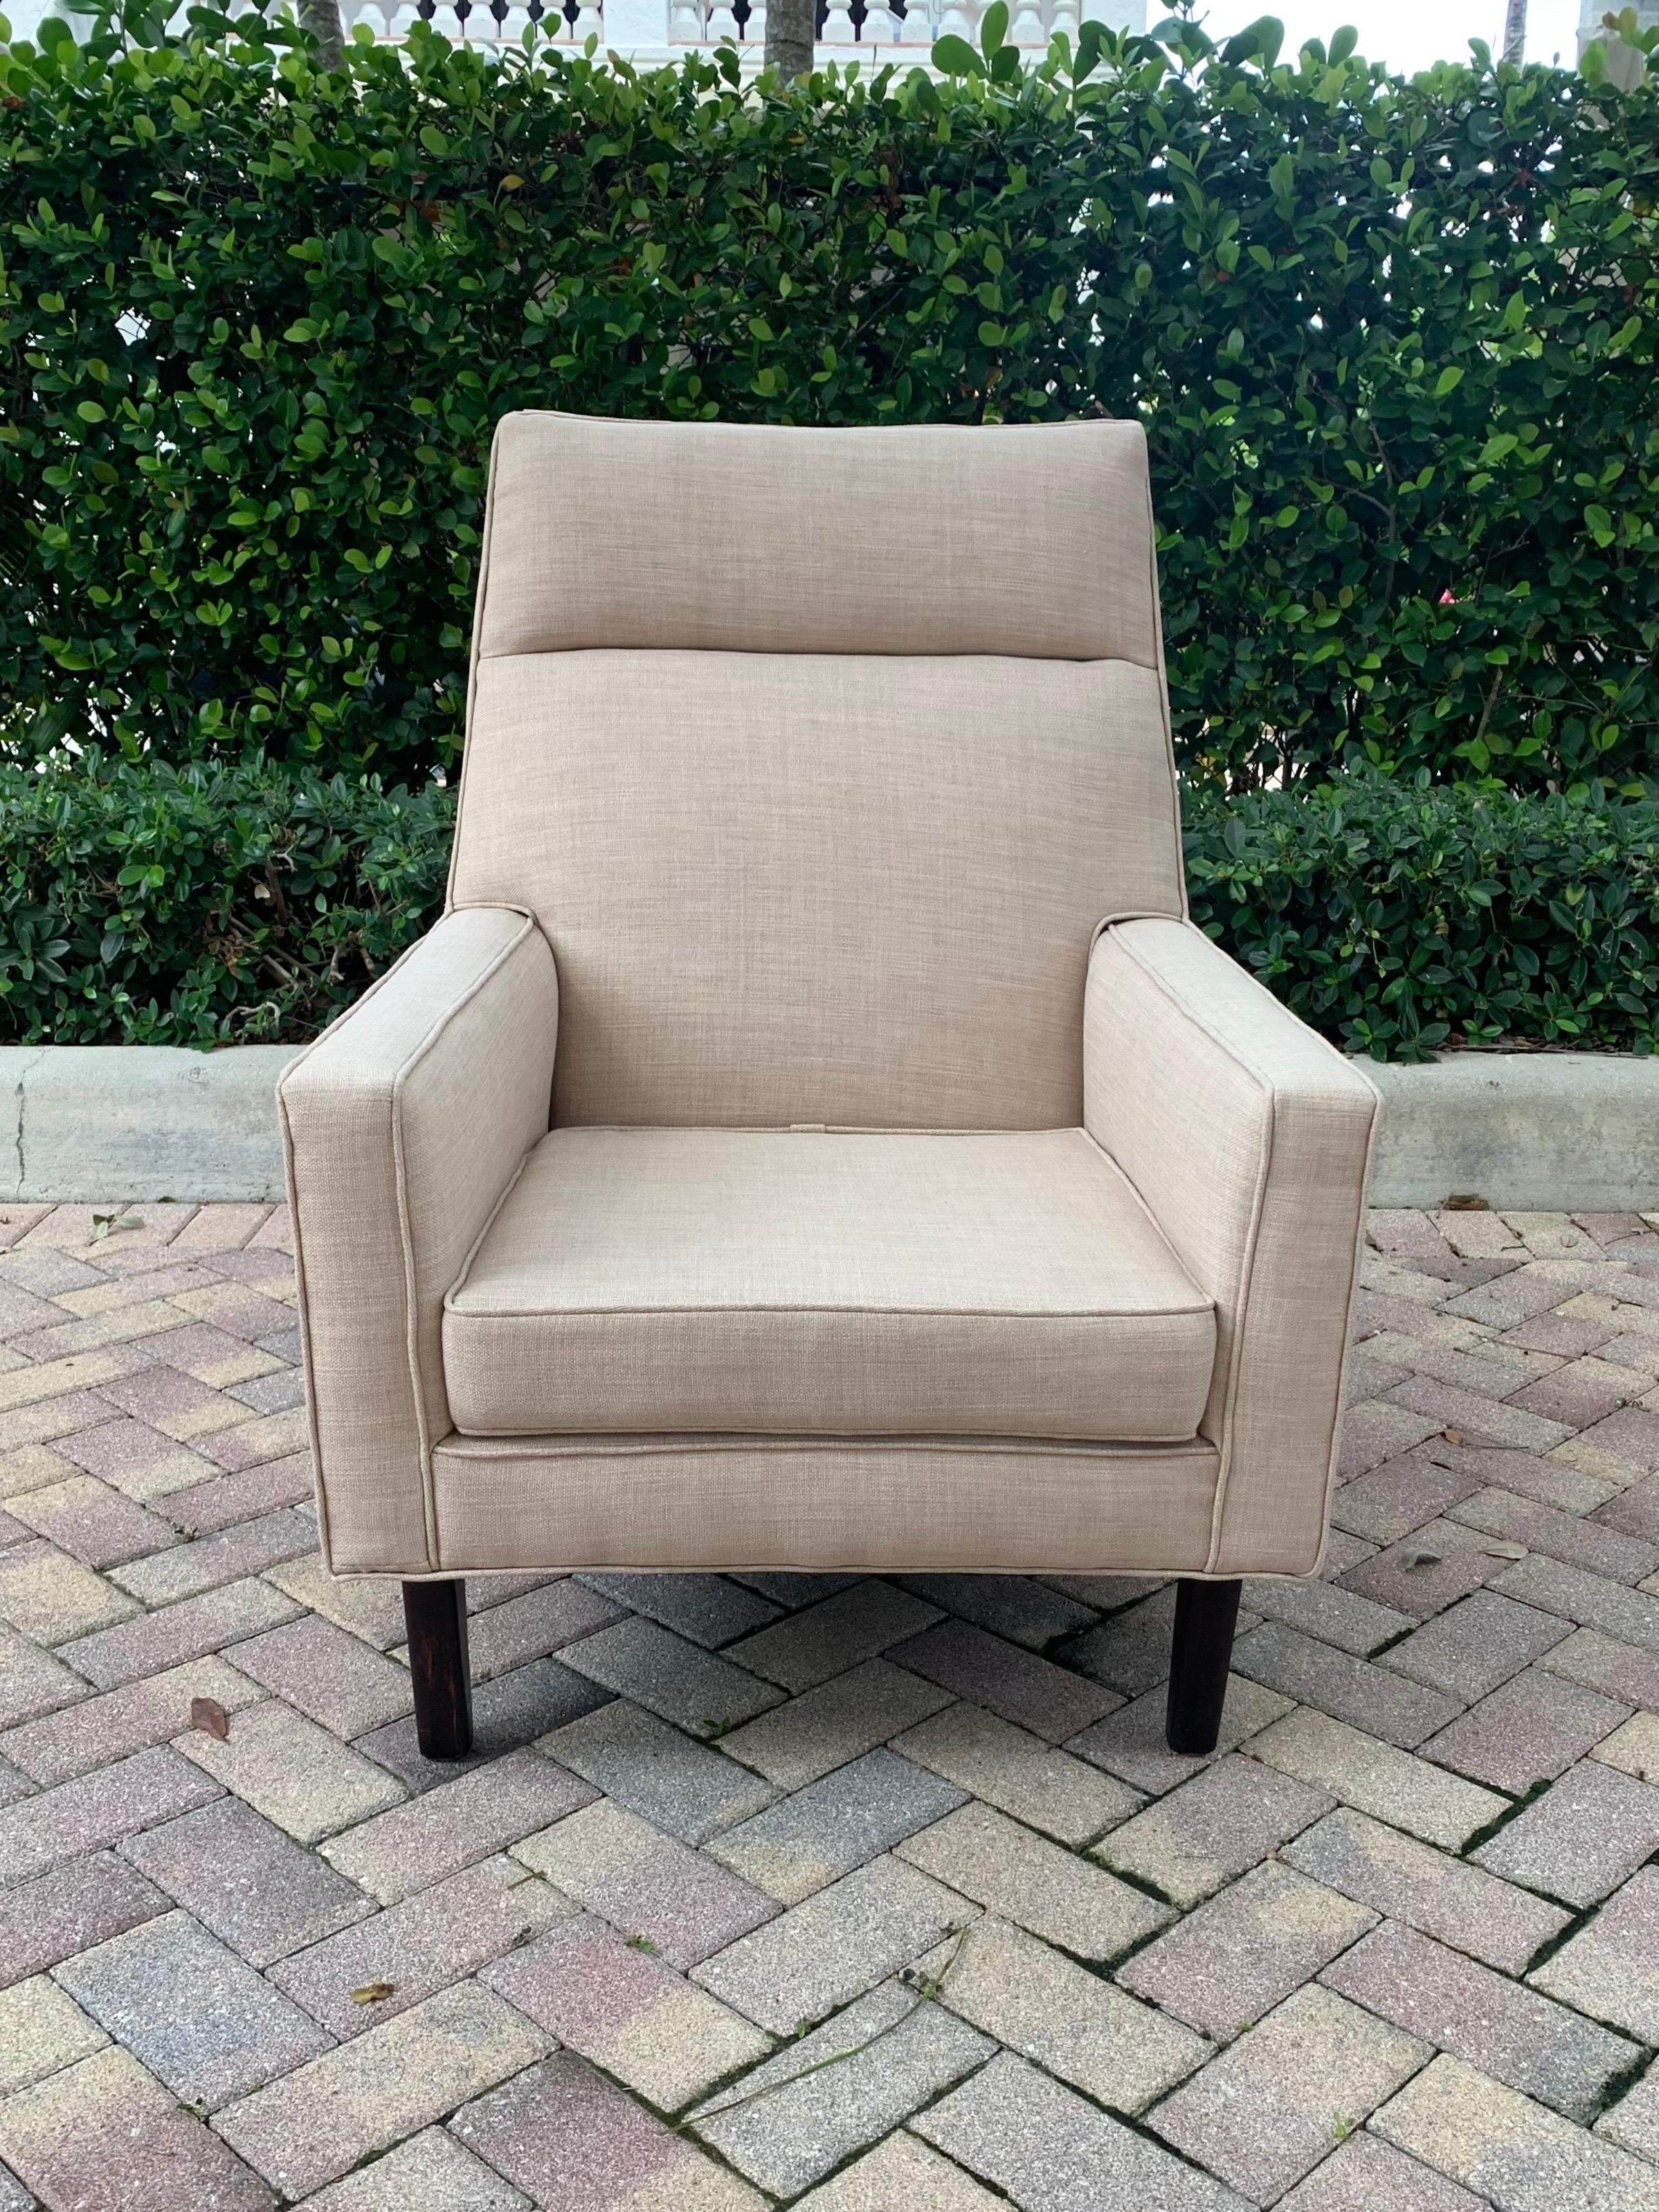 Tall back lounge chair designed by Edward Wormley for Dunbar furniture. Beautiful crisp lines frame the chair with grace and style. Edward Wormley’s designs are still often mimicked for high end designer furniture today. Made by one of the best